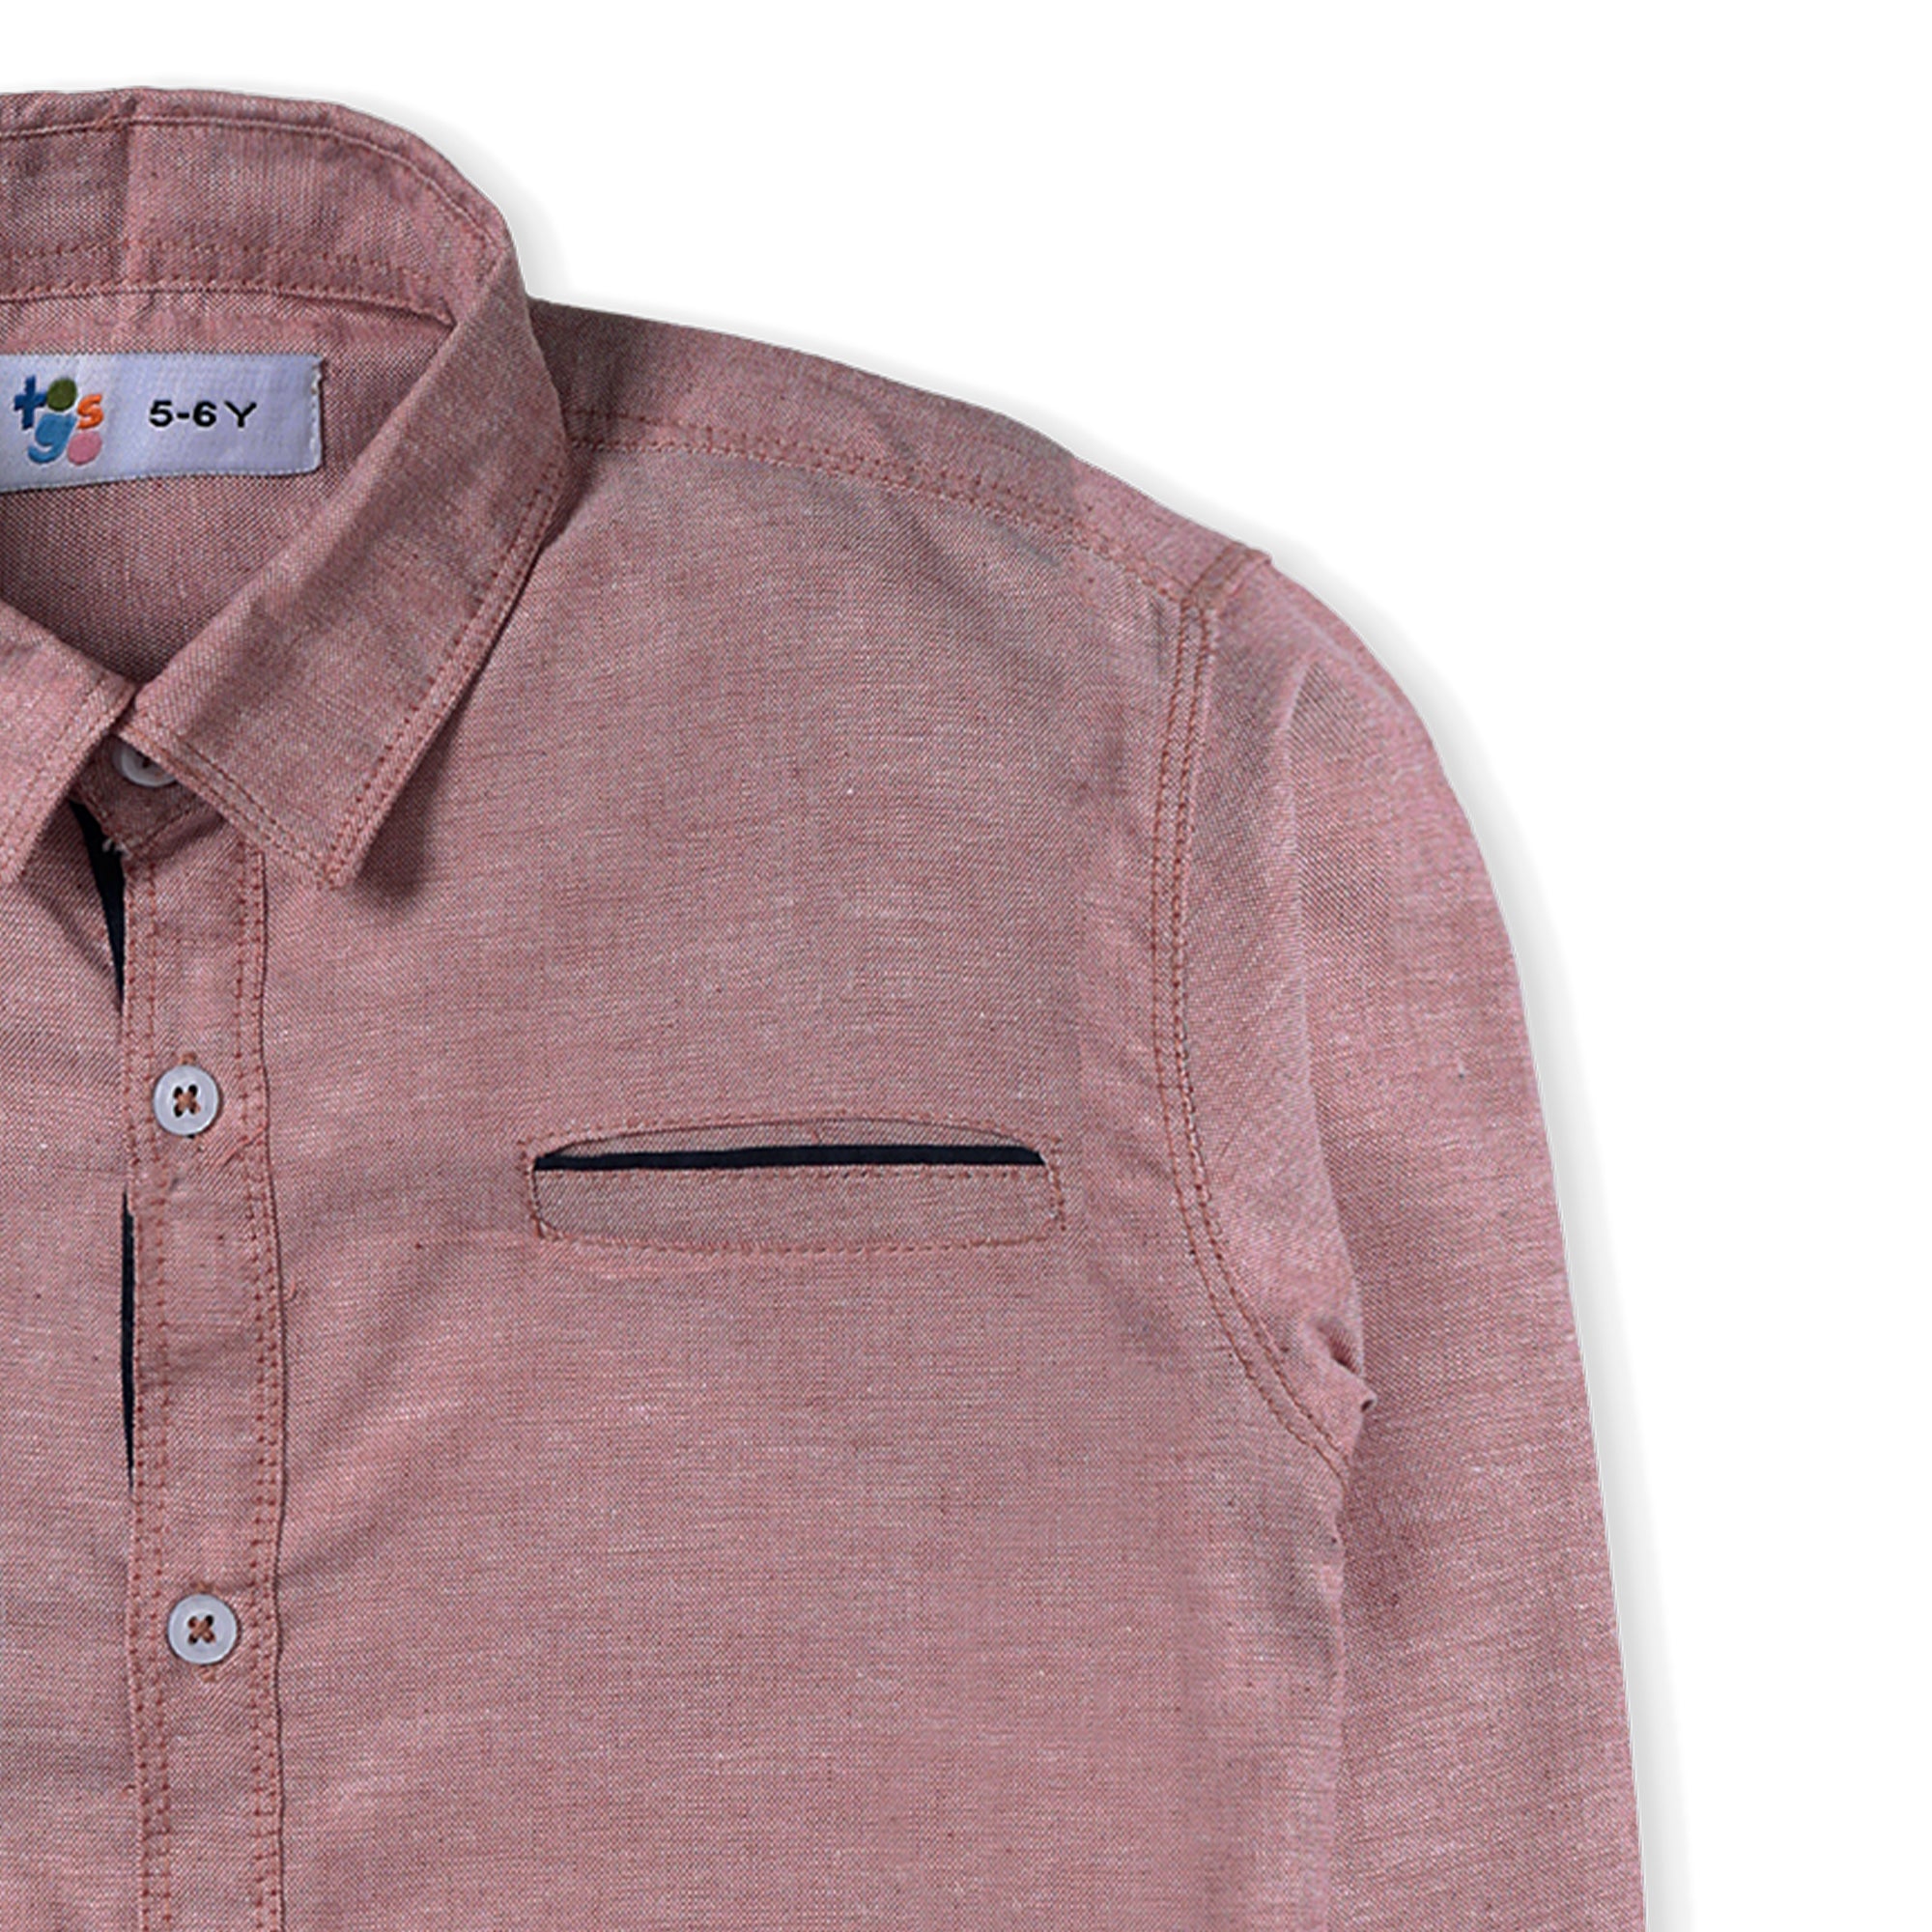 Casual shirt With Navy Bine Pocket